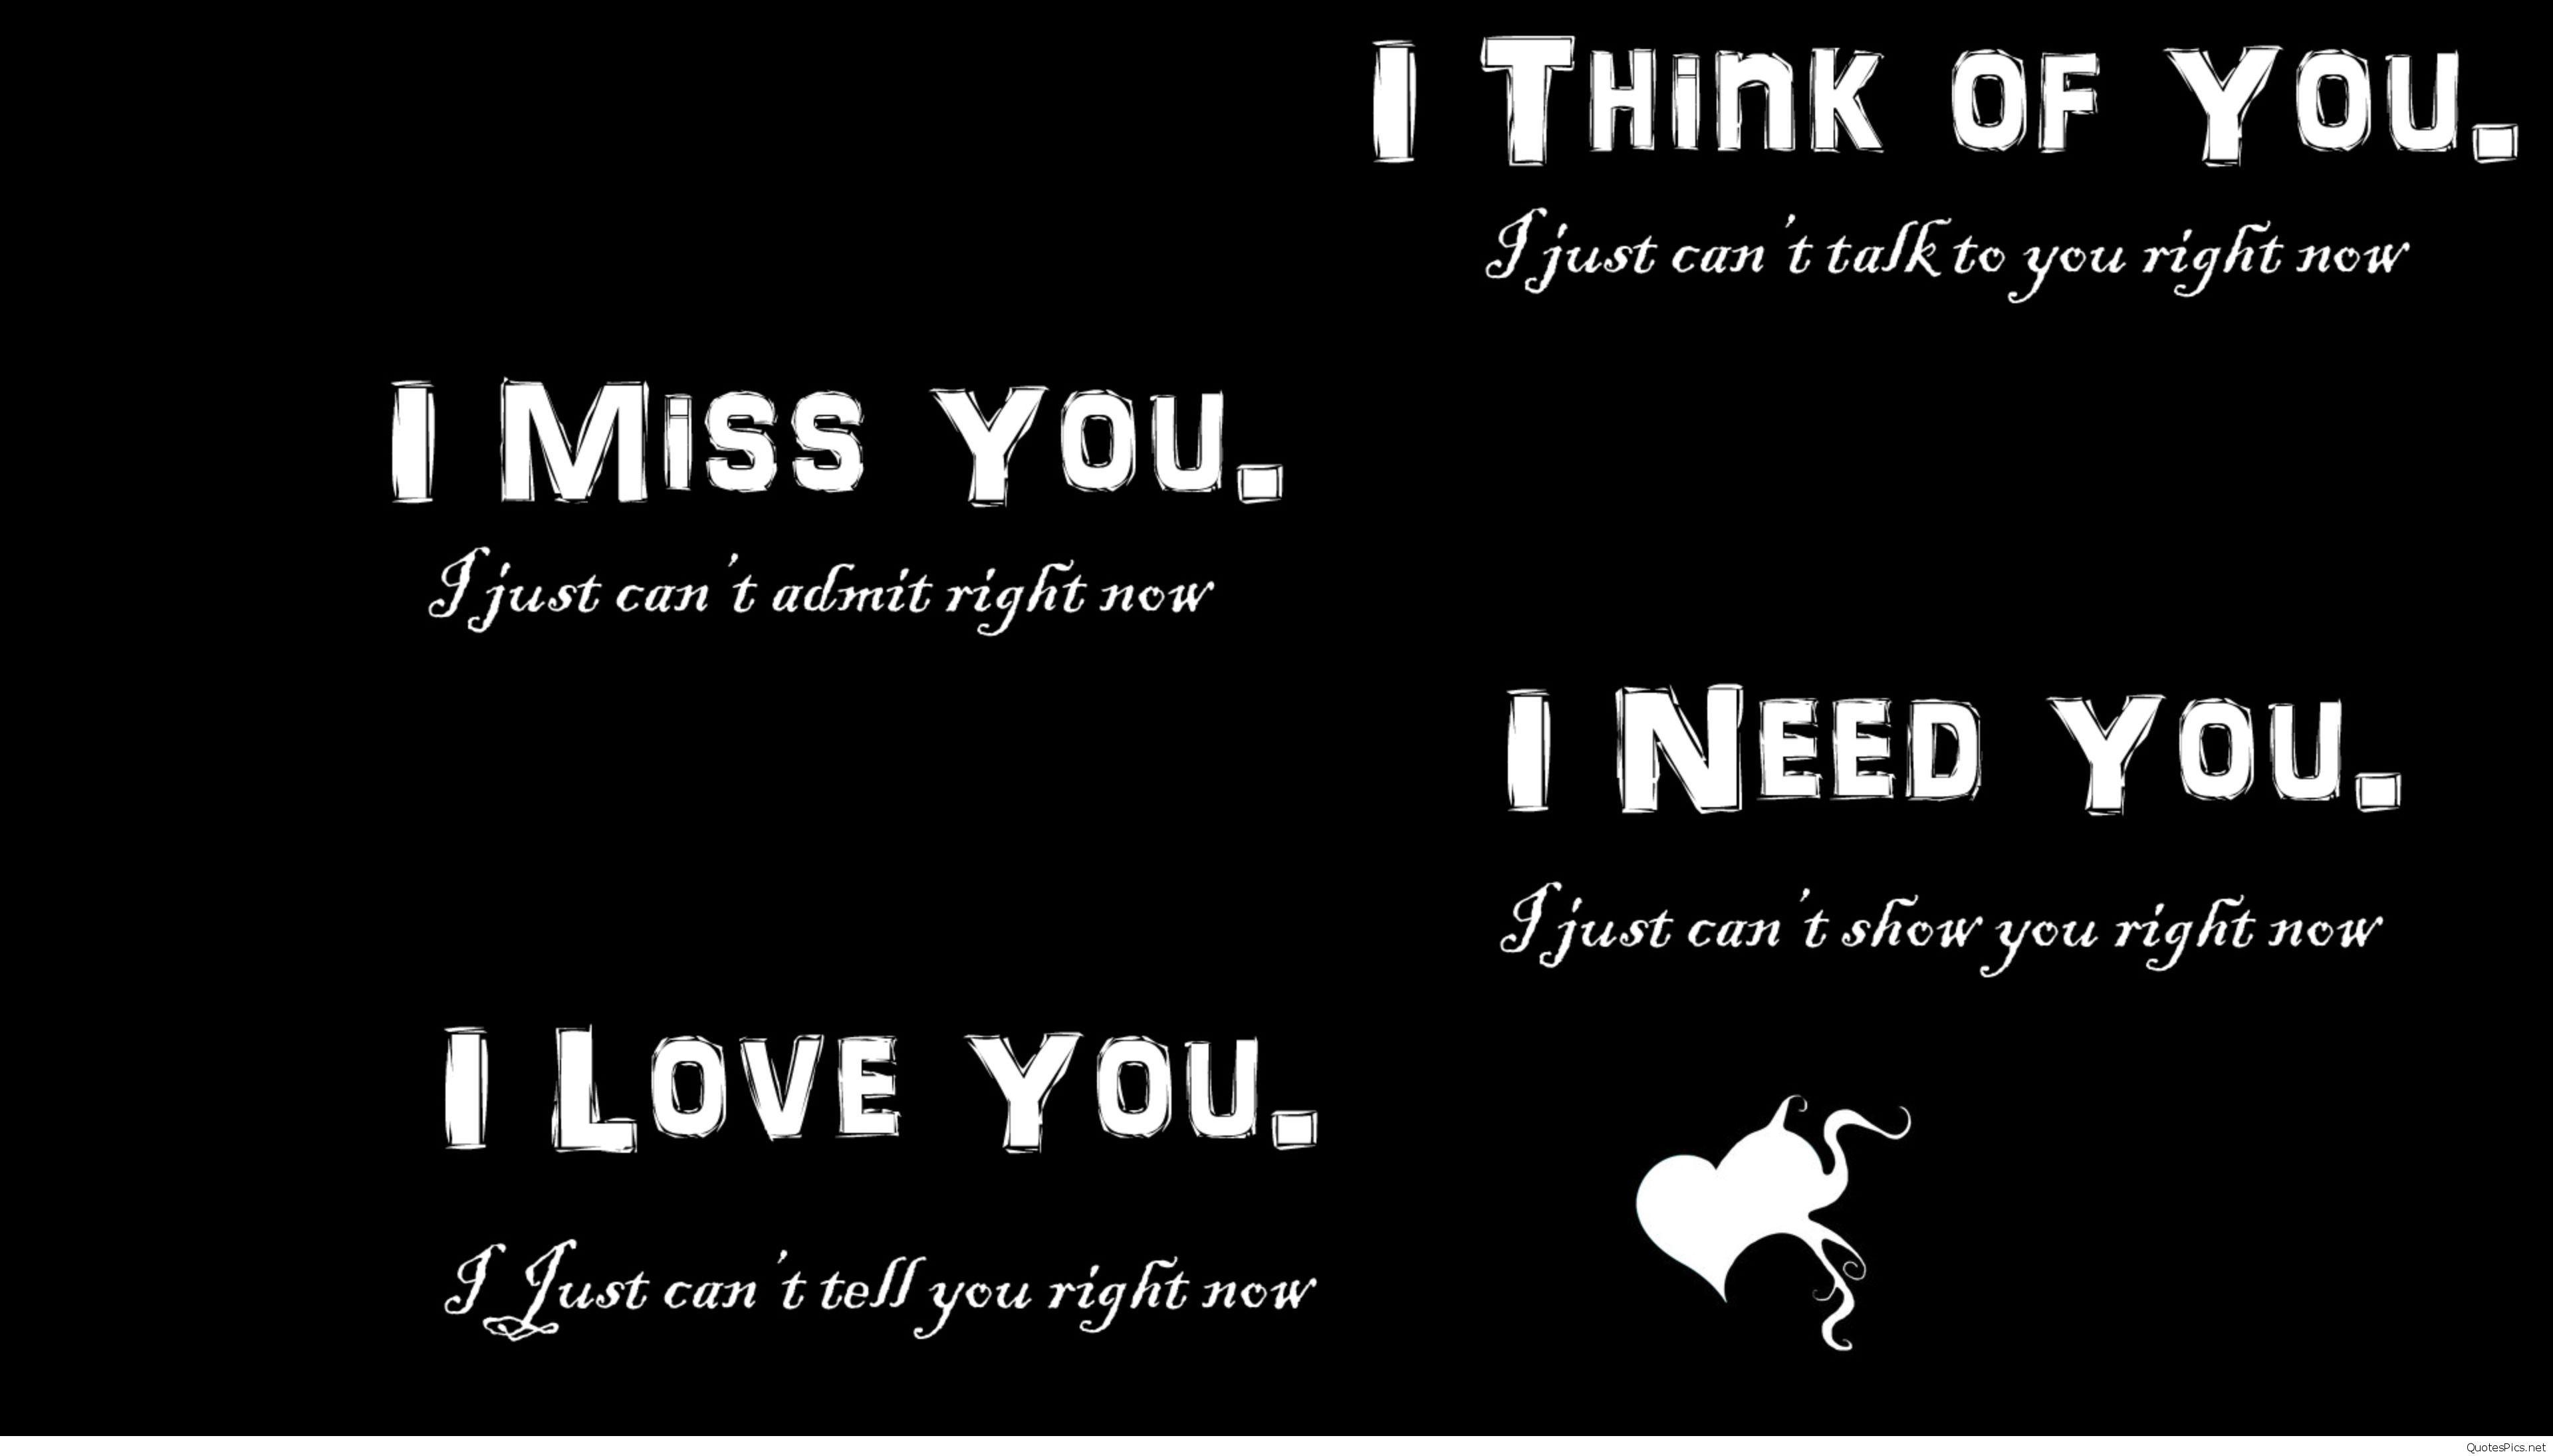 I miss you photo quotes and wallpaper missing you quotes